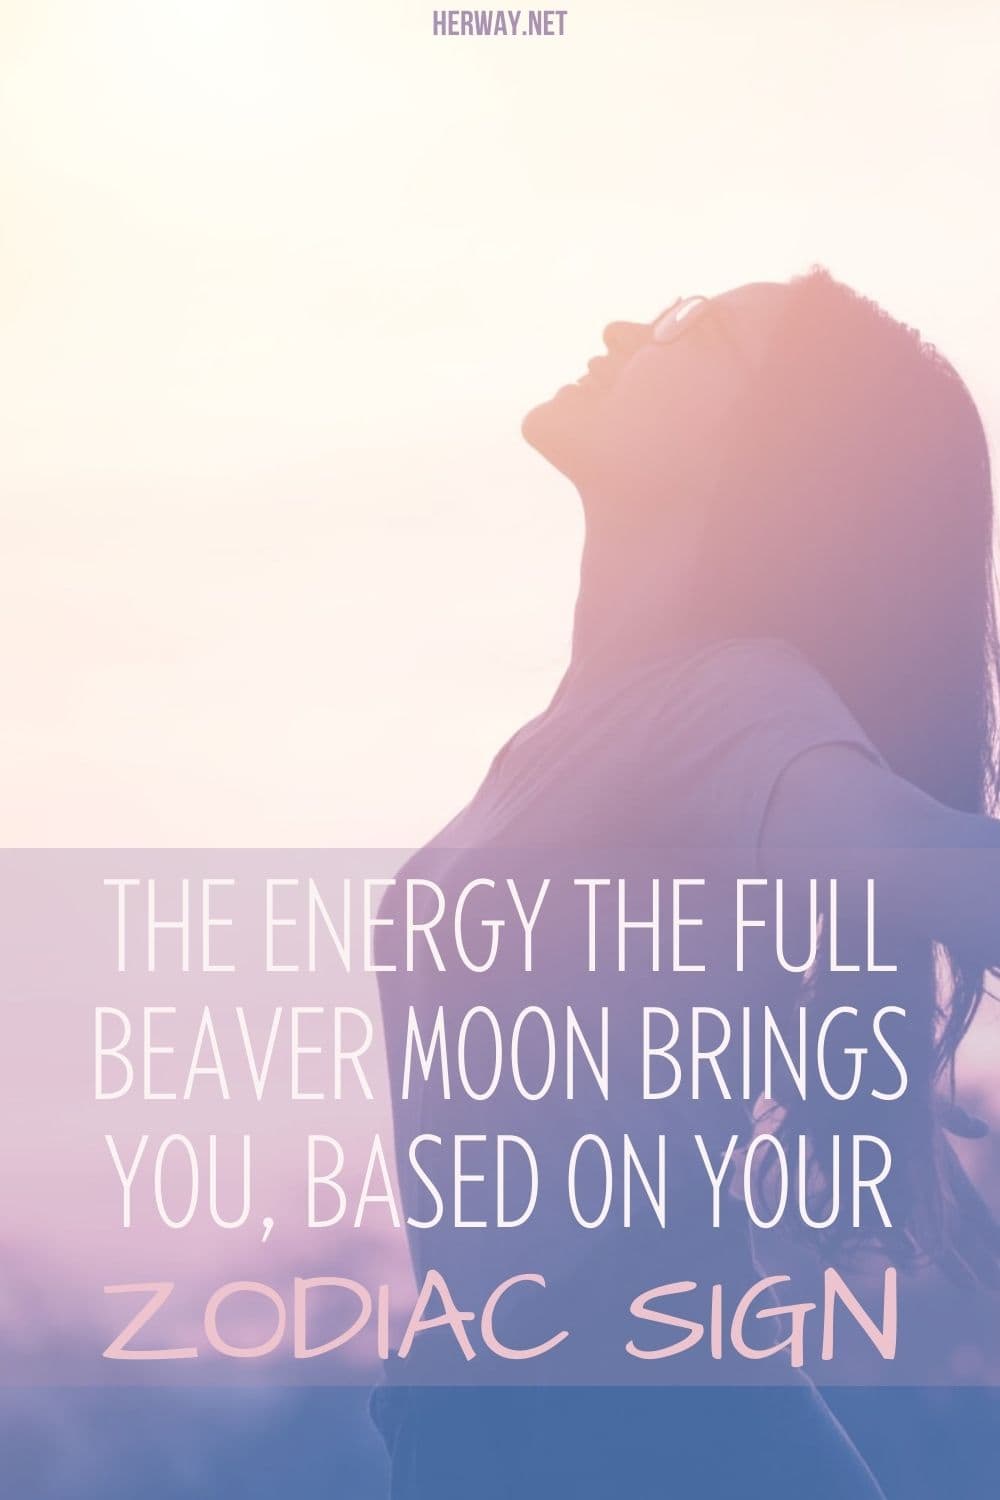 The Energy The Full Beaver Moon Brings You, Based On Your Zodiac Sign